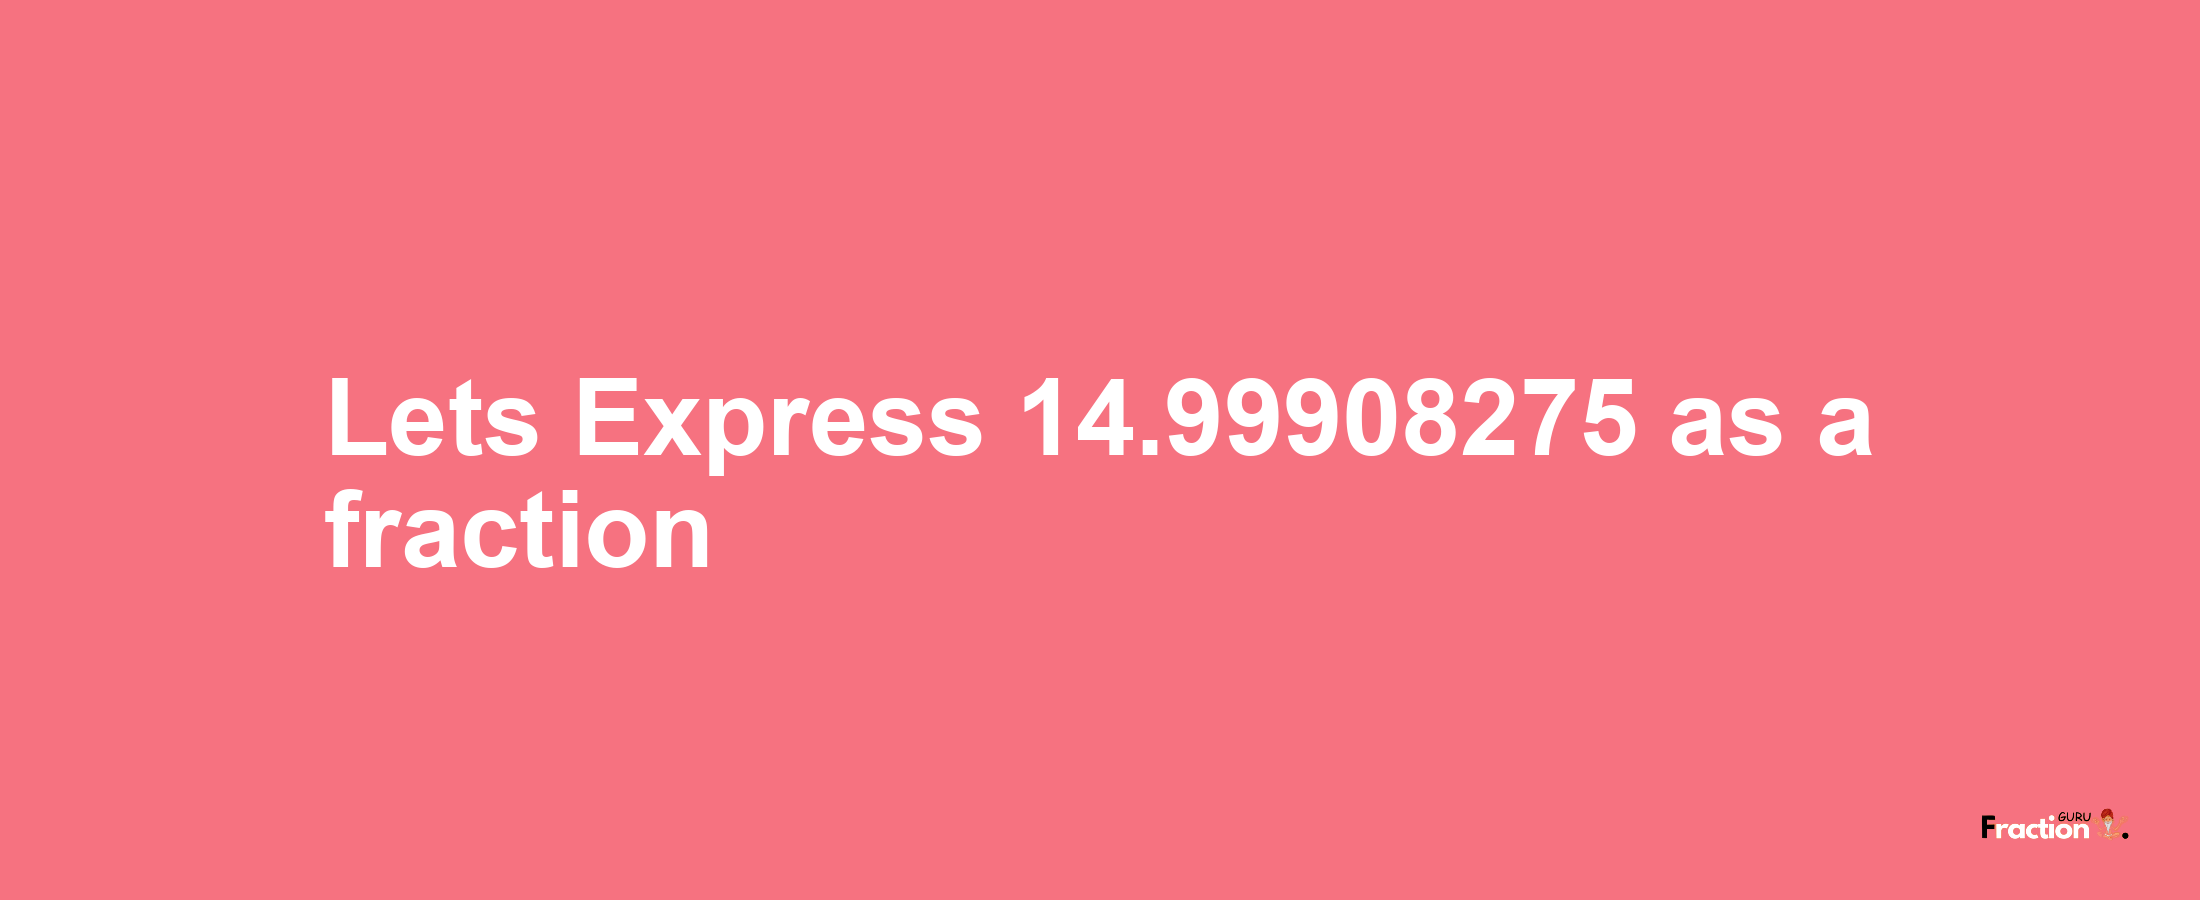 Lets Express 14.99908275 as afraction